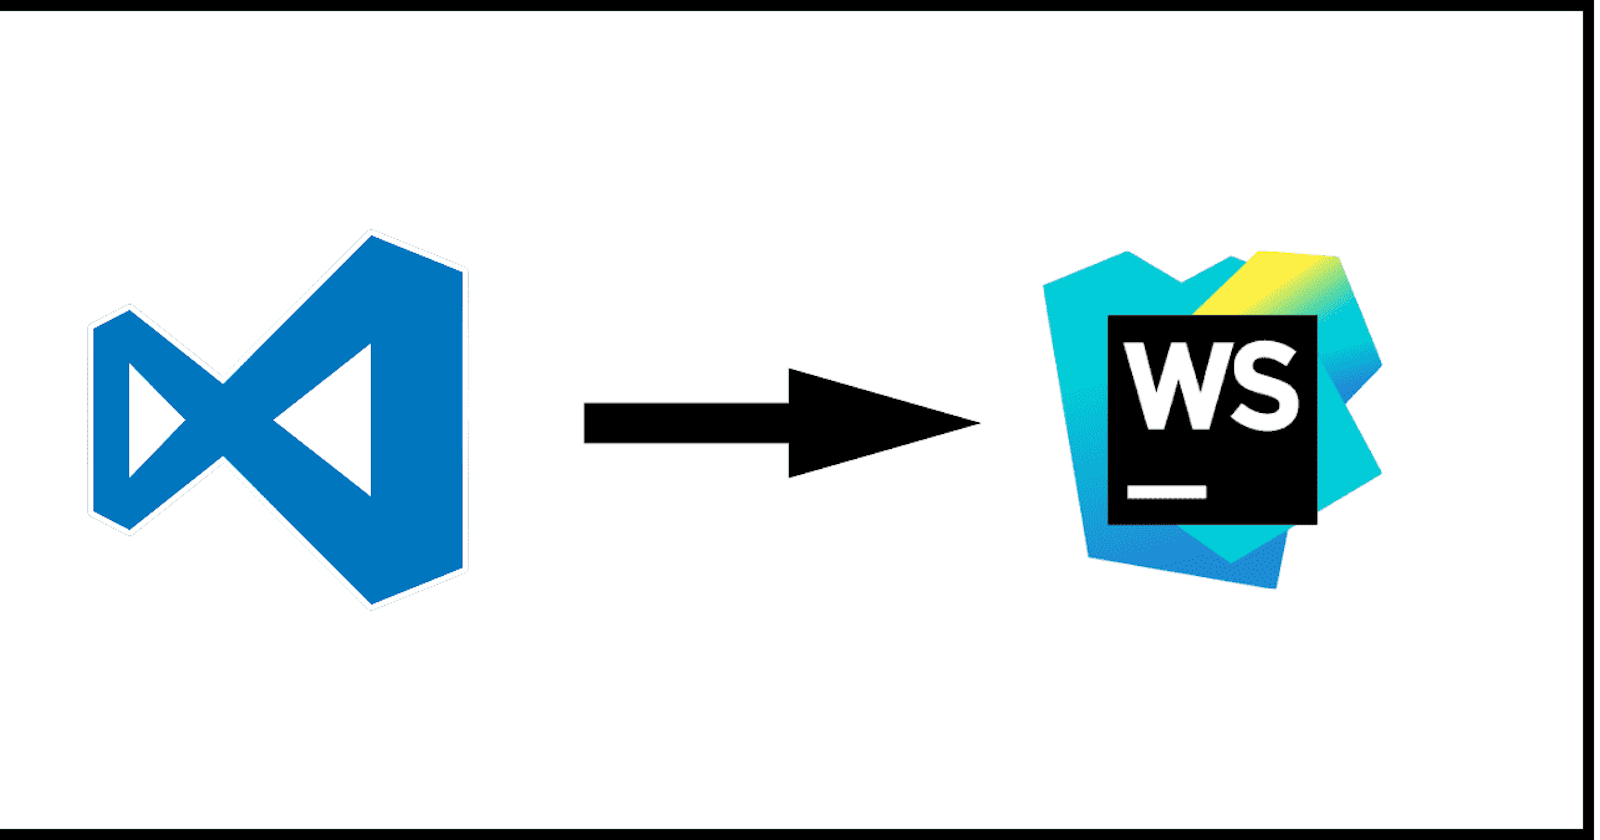 Why I Switched From Visual Studio Code to JetBrains WebStorm